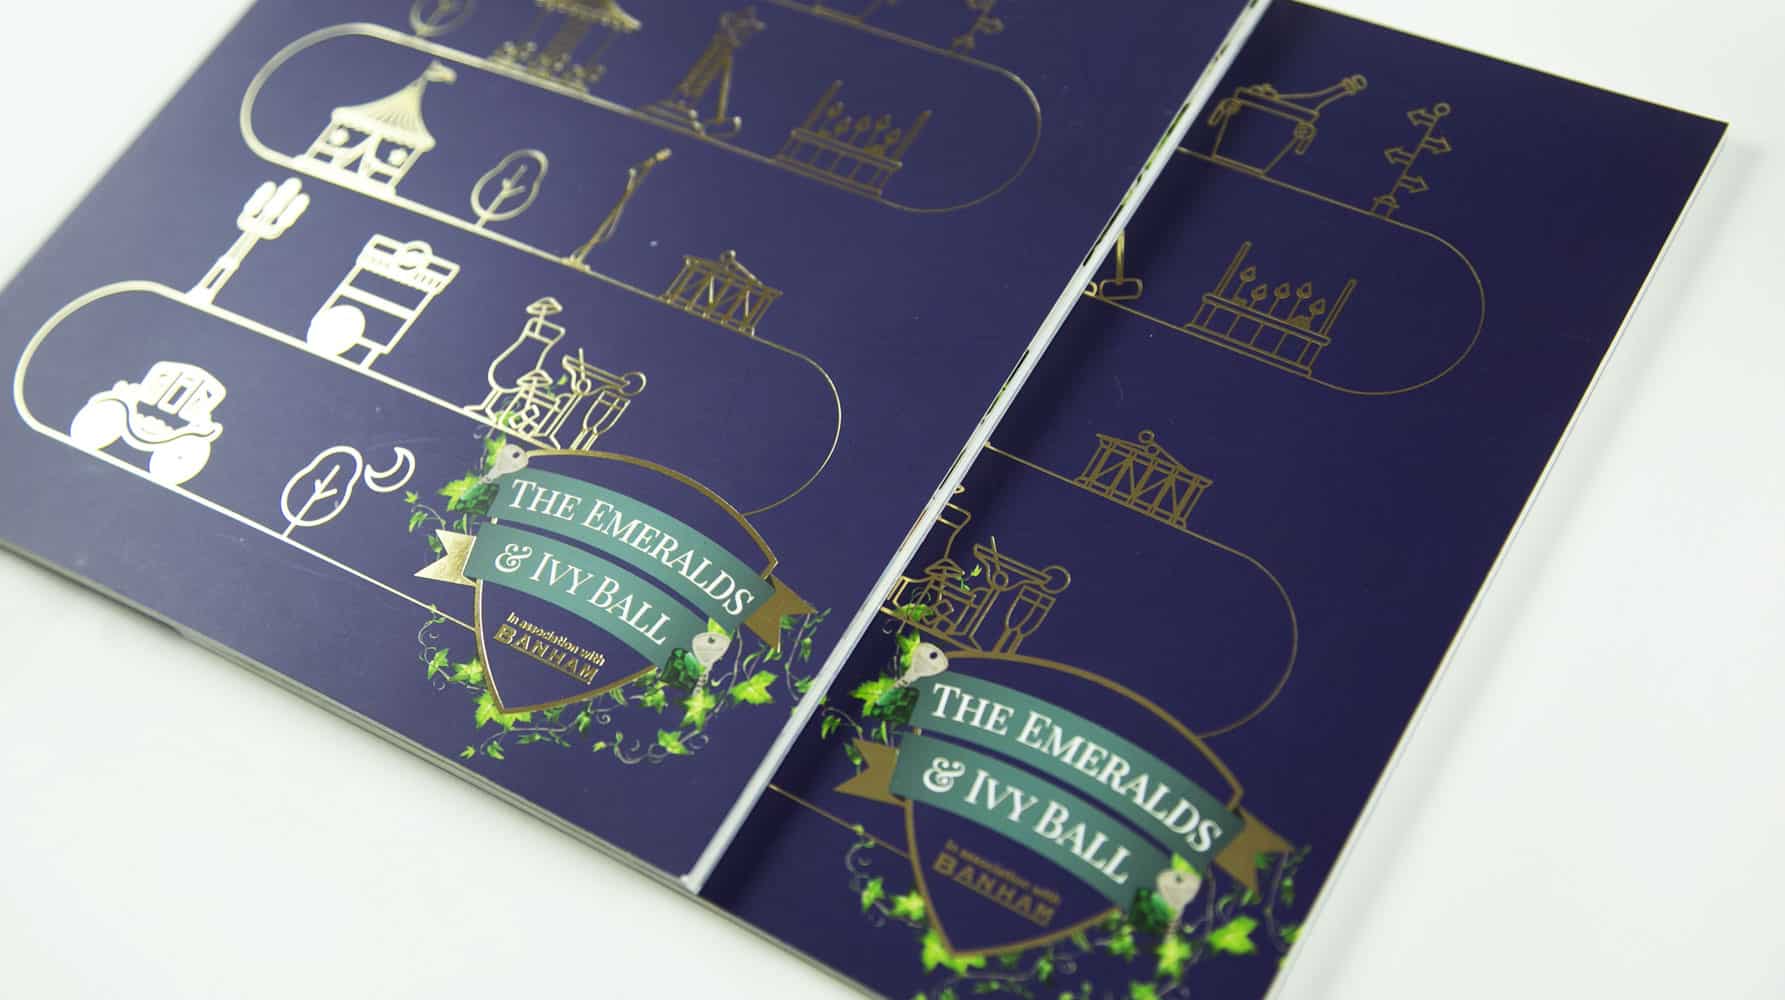 ave design studio london graphic design and website design and development for charities and not-for-profit organisations Cancer Research UK Emeralds & Ivy Ball branding and identity